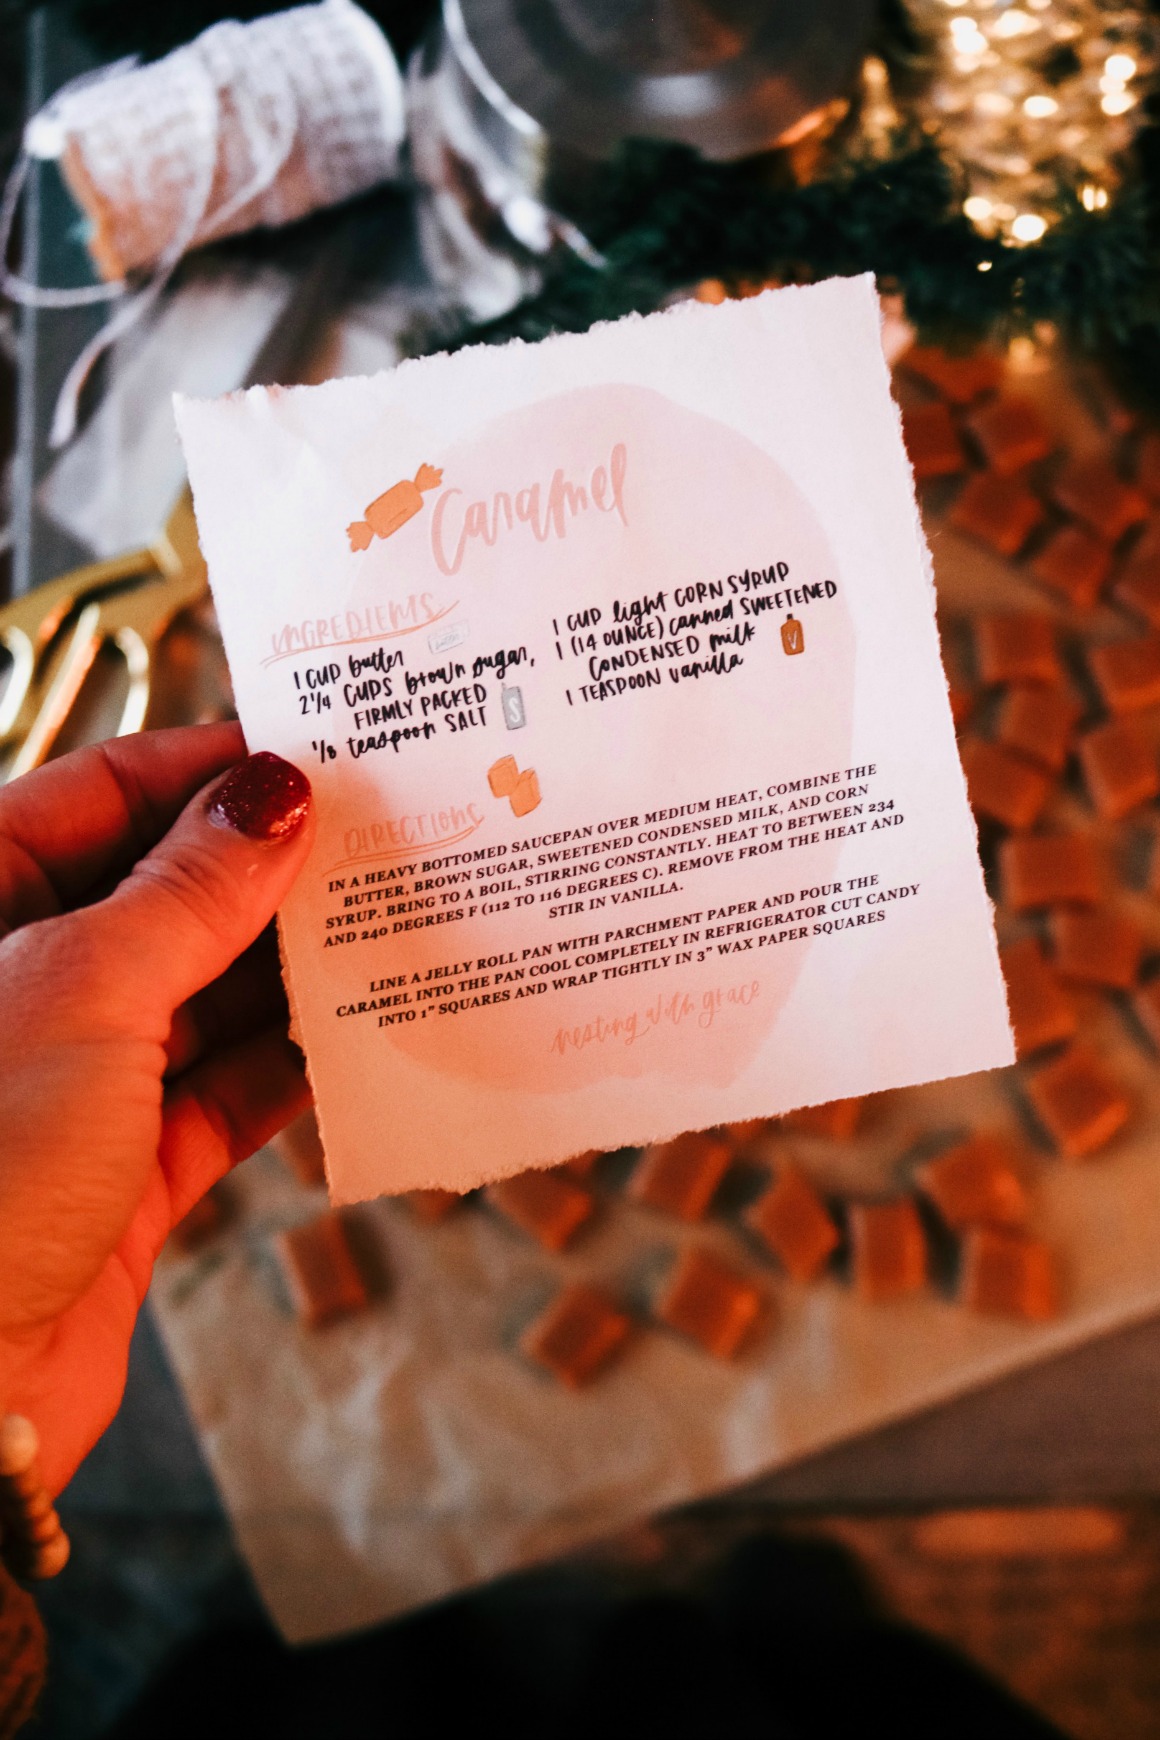 Easiest Caramel Recipe and Printable